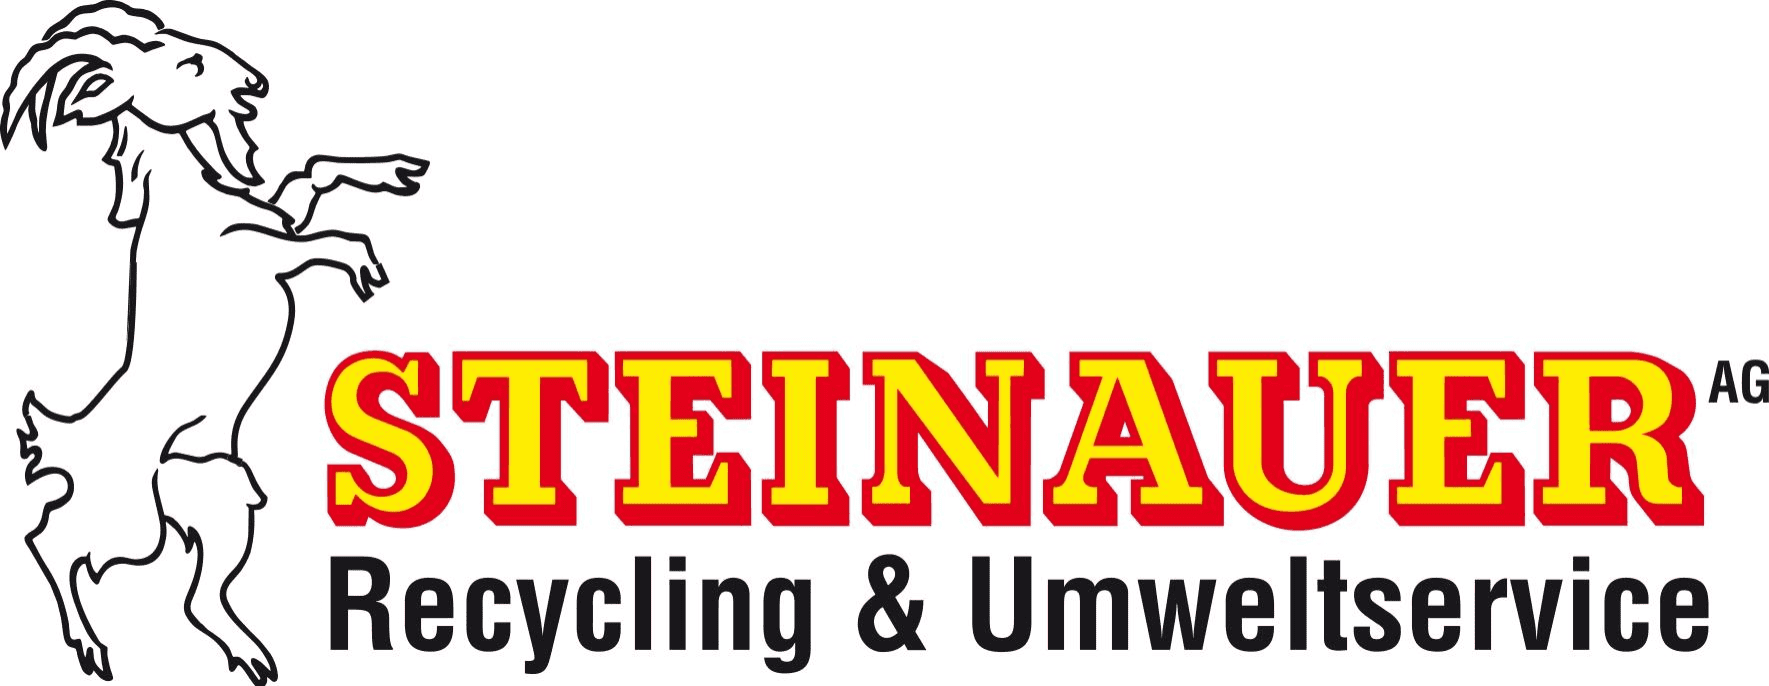 STEINAUER AG Recycling & Umweltservice